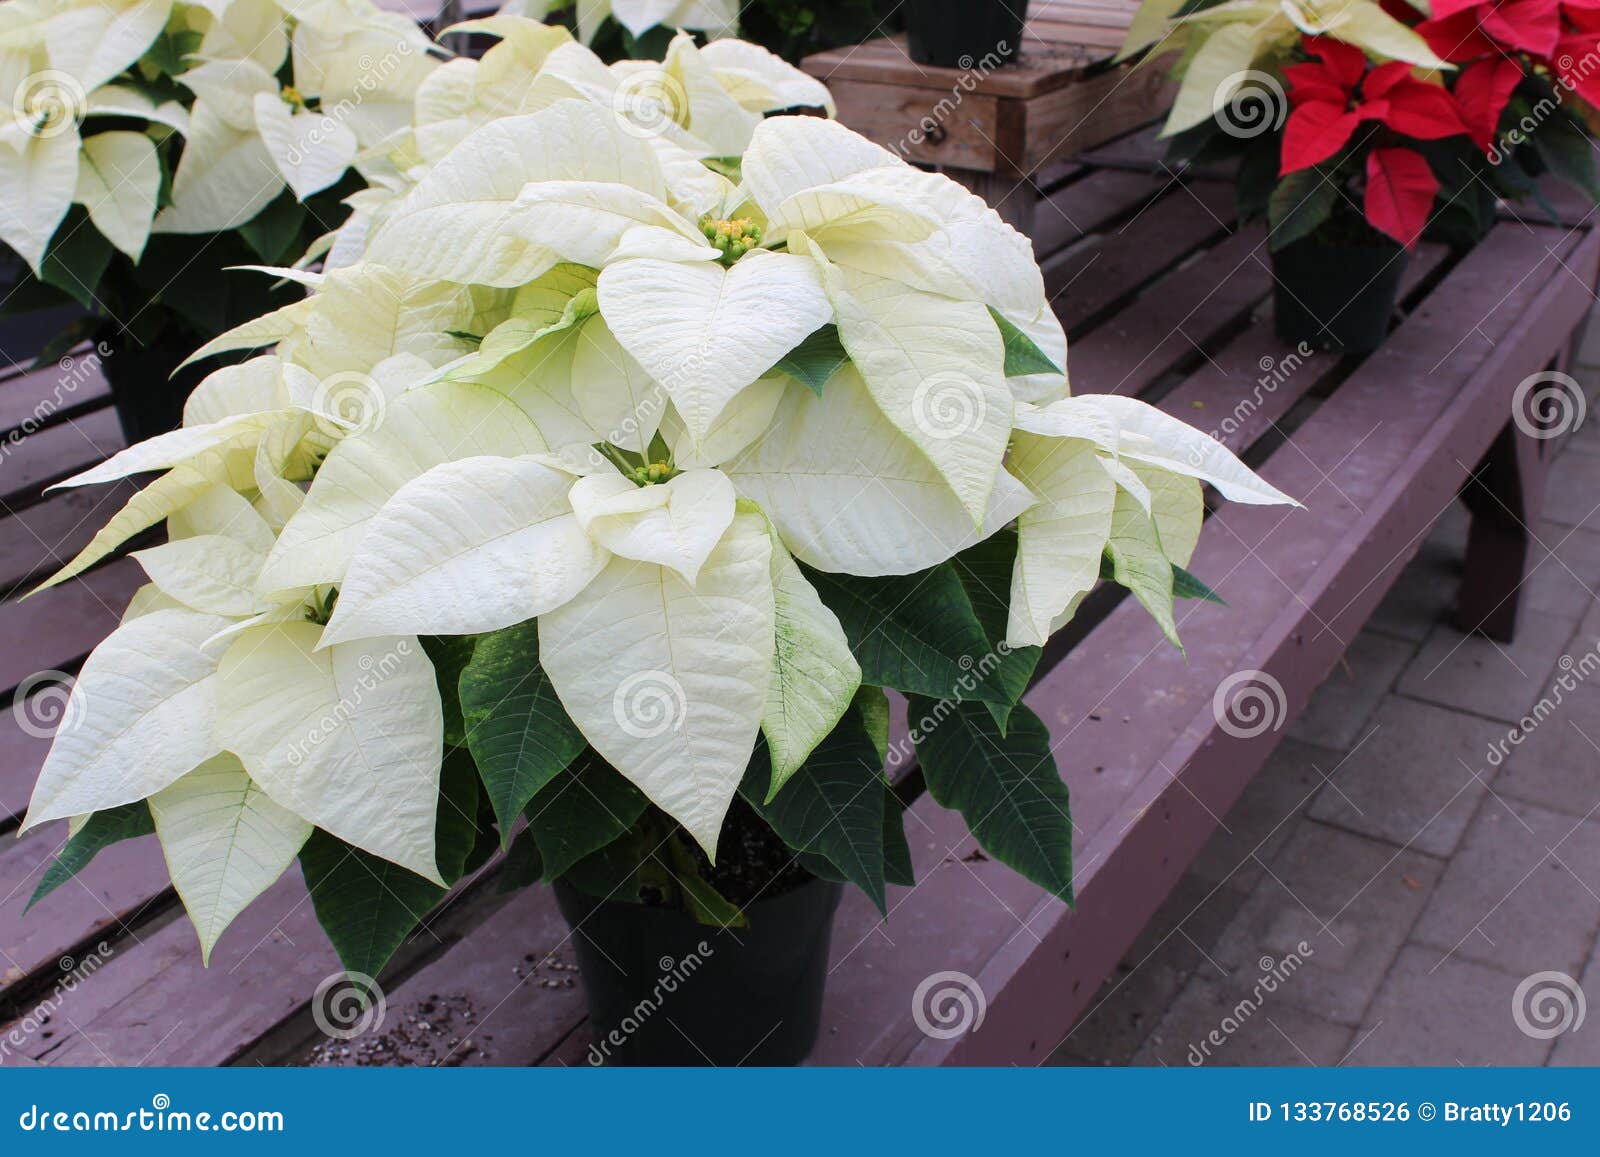 Pretty Pink, White and Red Poinsettia Plants on Wood Tables, Helping To  Usher in the Holidays Stock Photo - Image of line, peace: 133768526